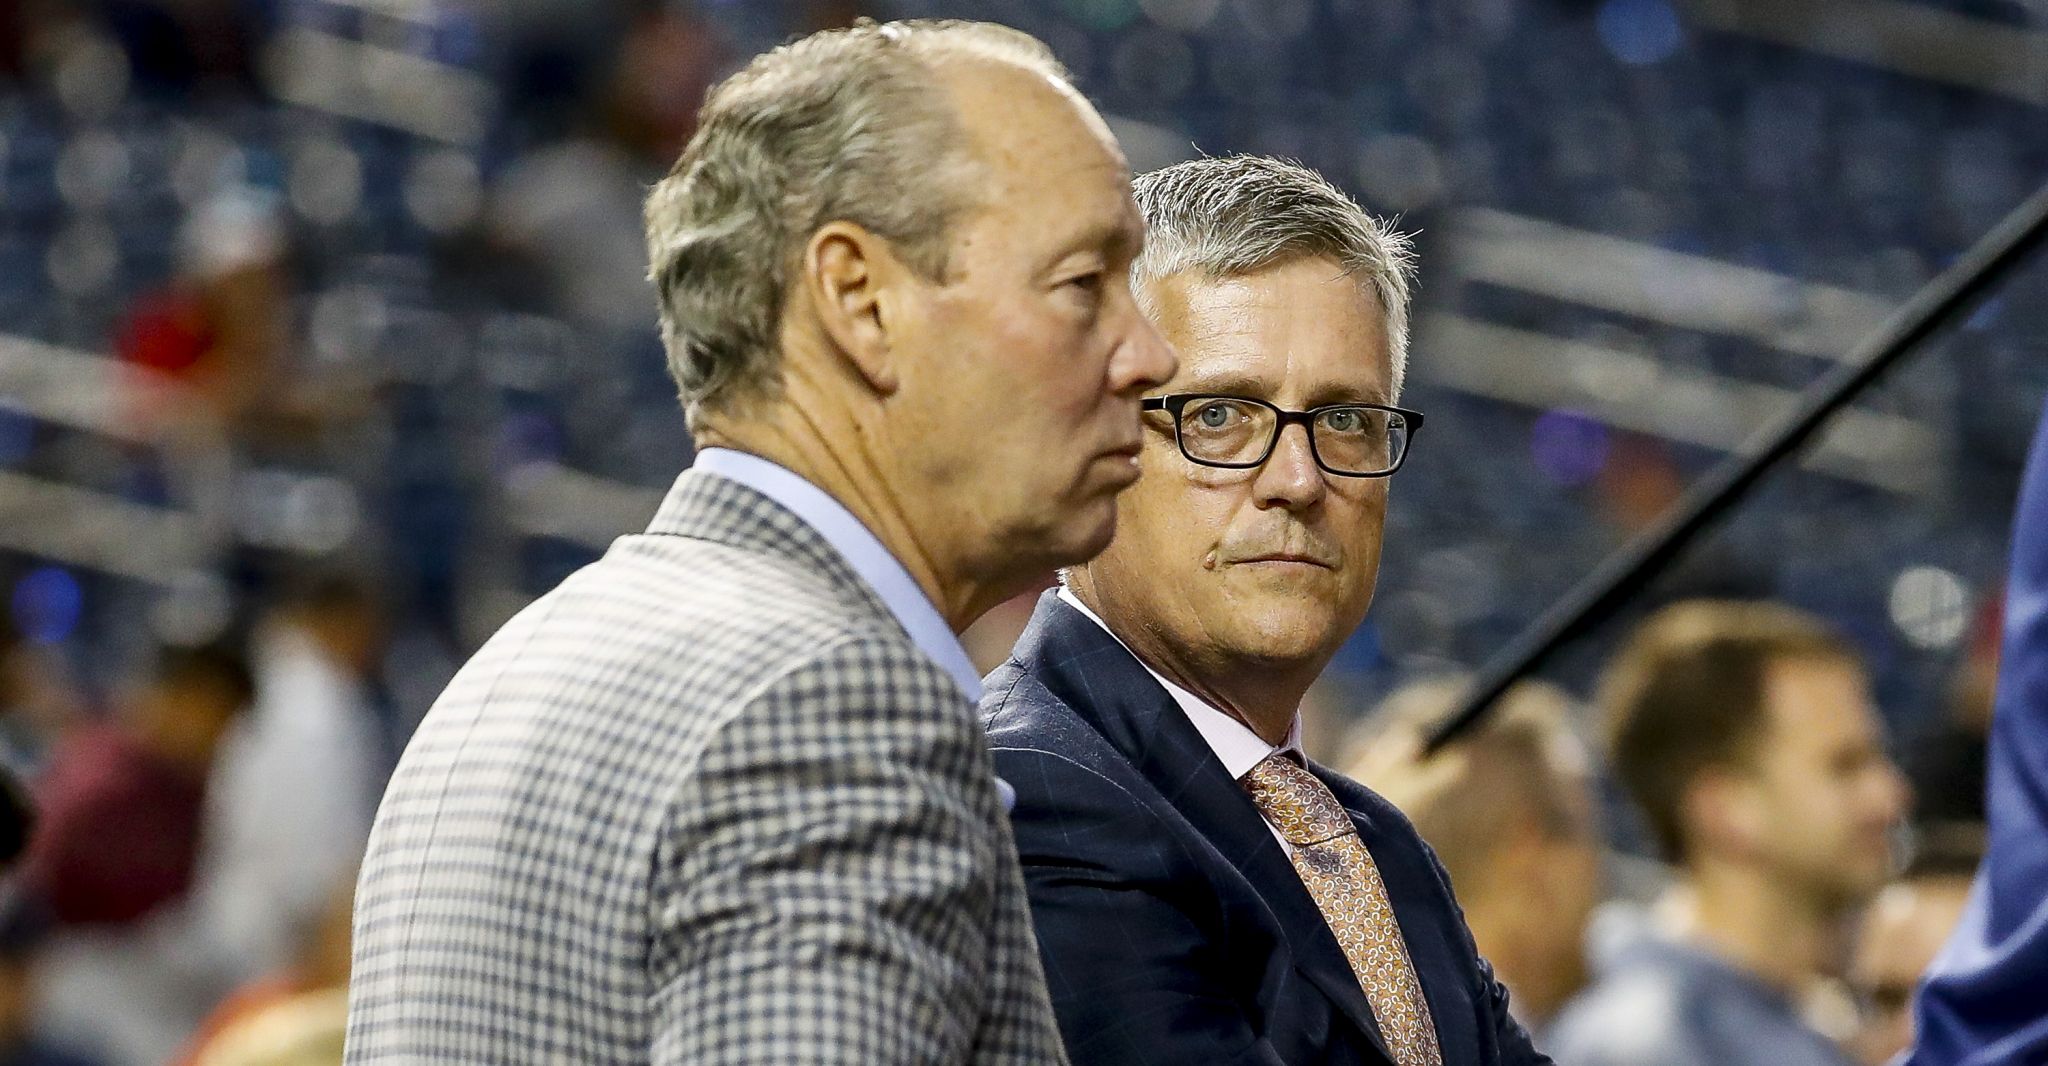 MLB to look into claims against Astros executive Brandon Taubman